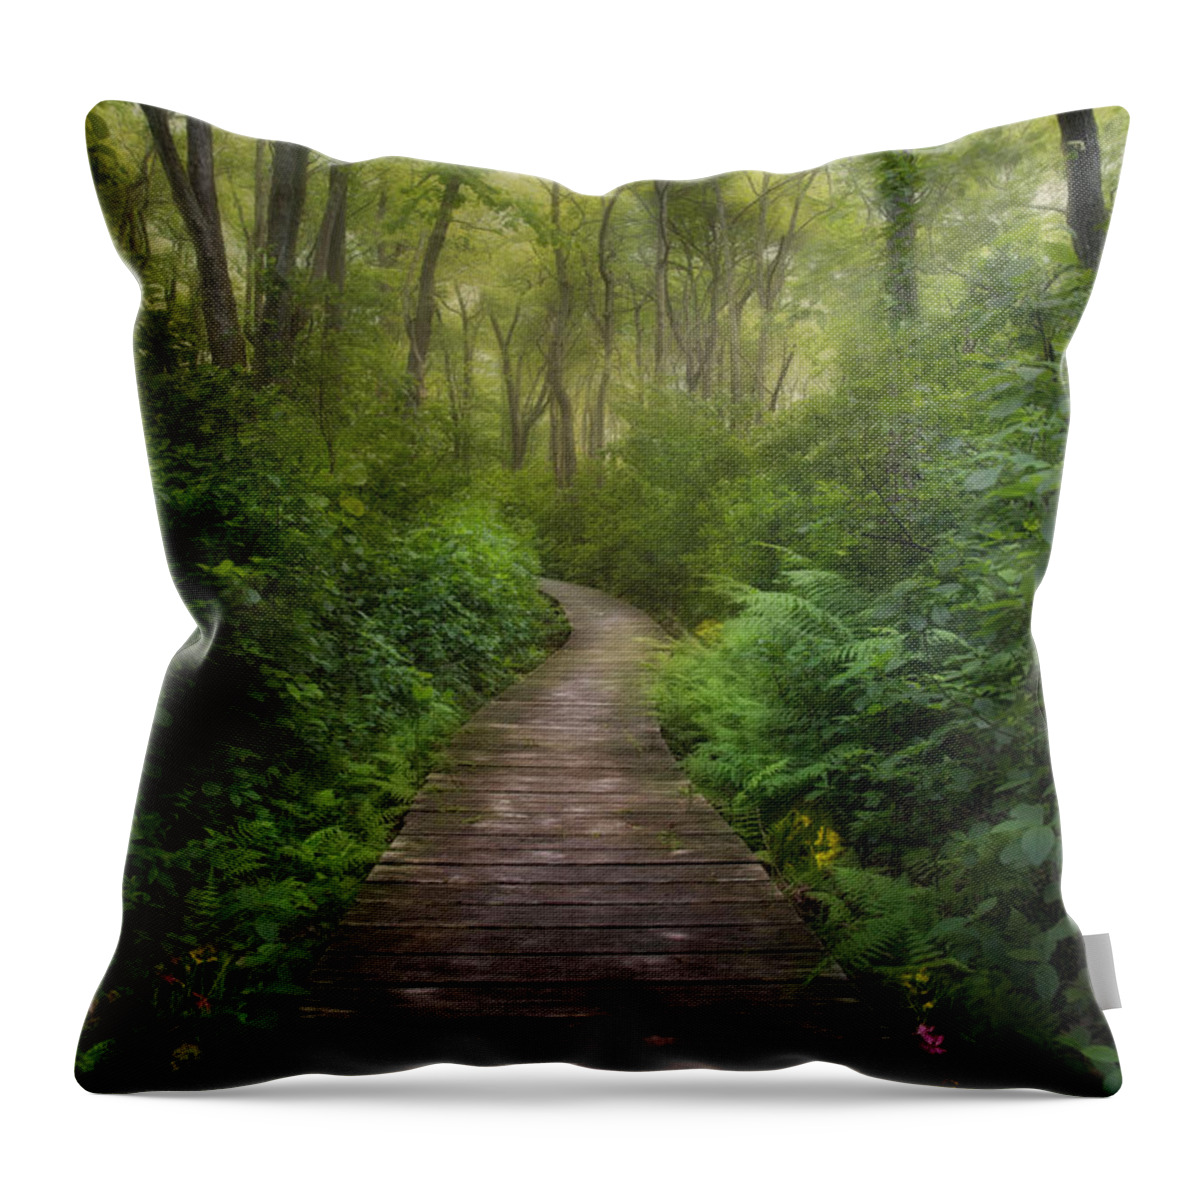 Woodland Throw Pillow featuring the photograph Neck Of The Woods by Robin-Lee Vieira